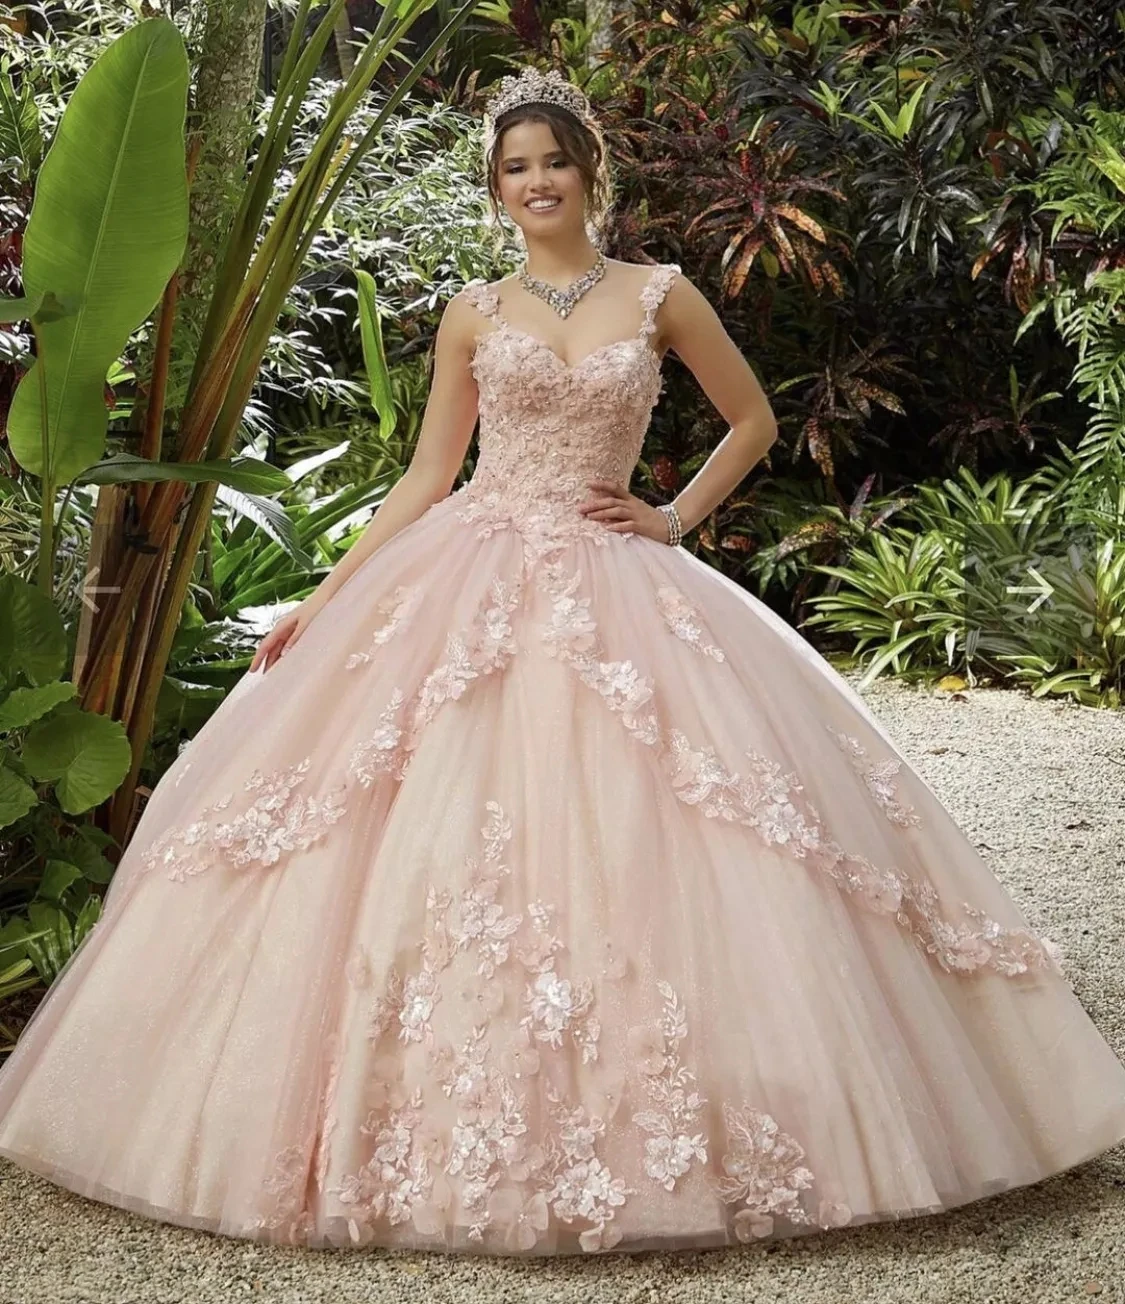 

Blush Cheap Quinceanera Dresses Ball Gown Spaghetti Straps Tulle Appliques Beaded Puffy Sweet 16 Dresses HWF016